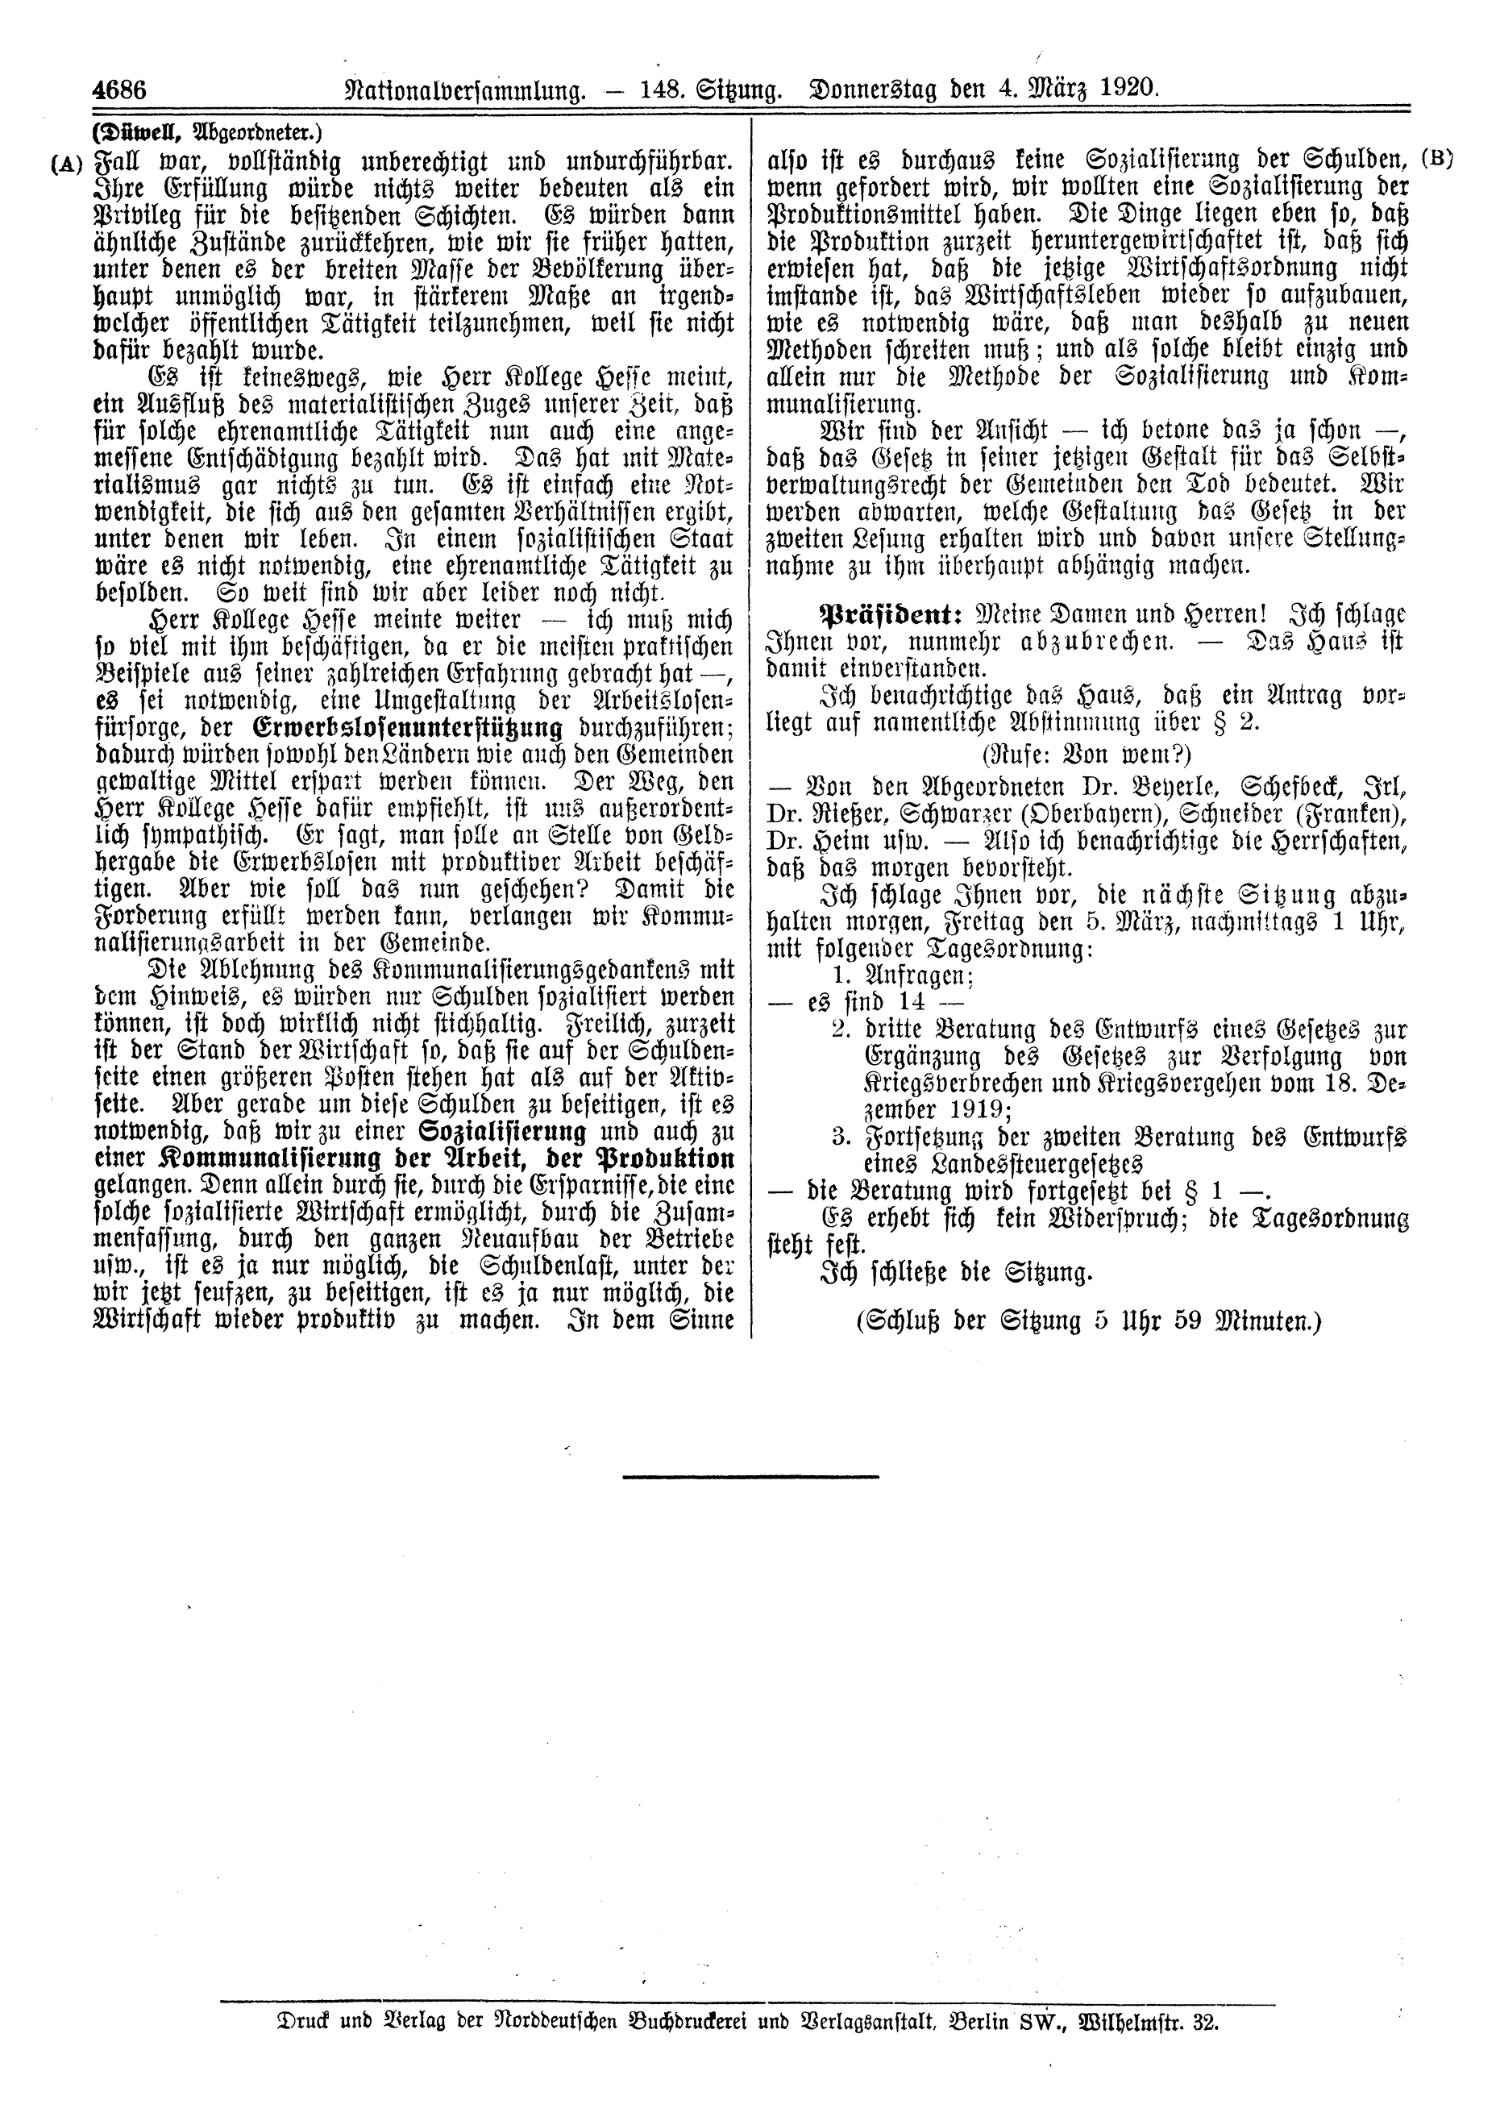 Scan of page 4686